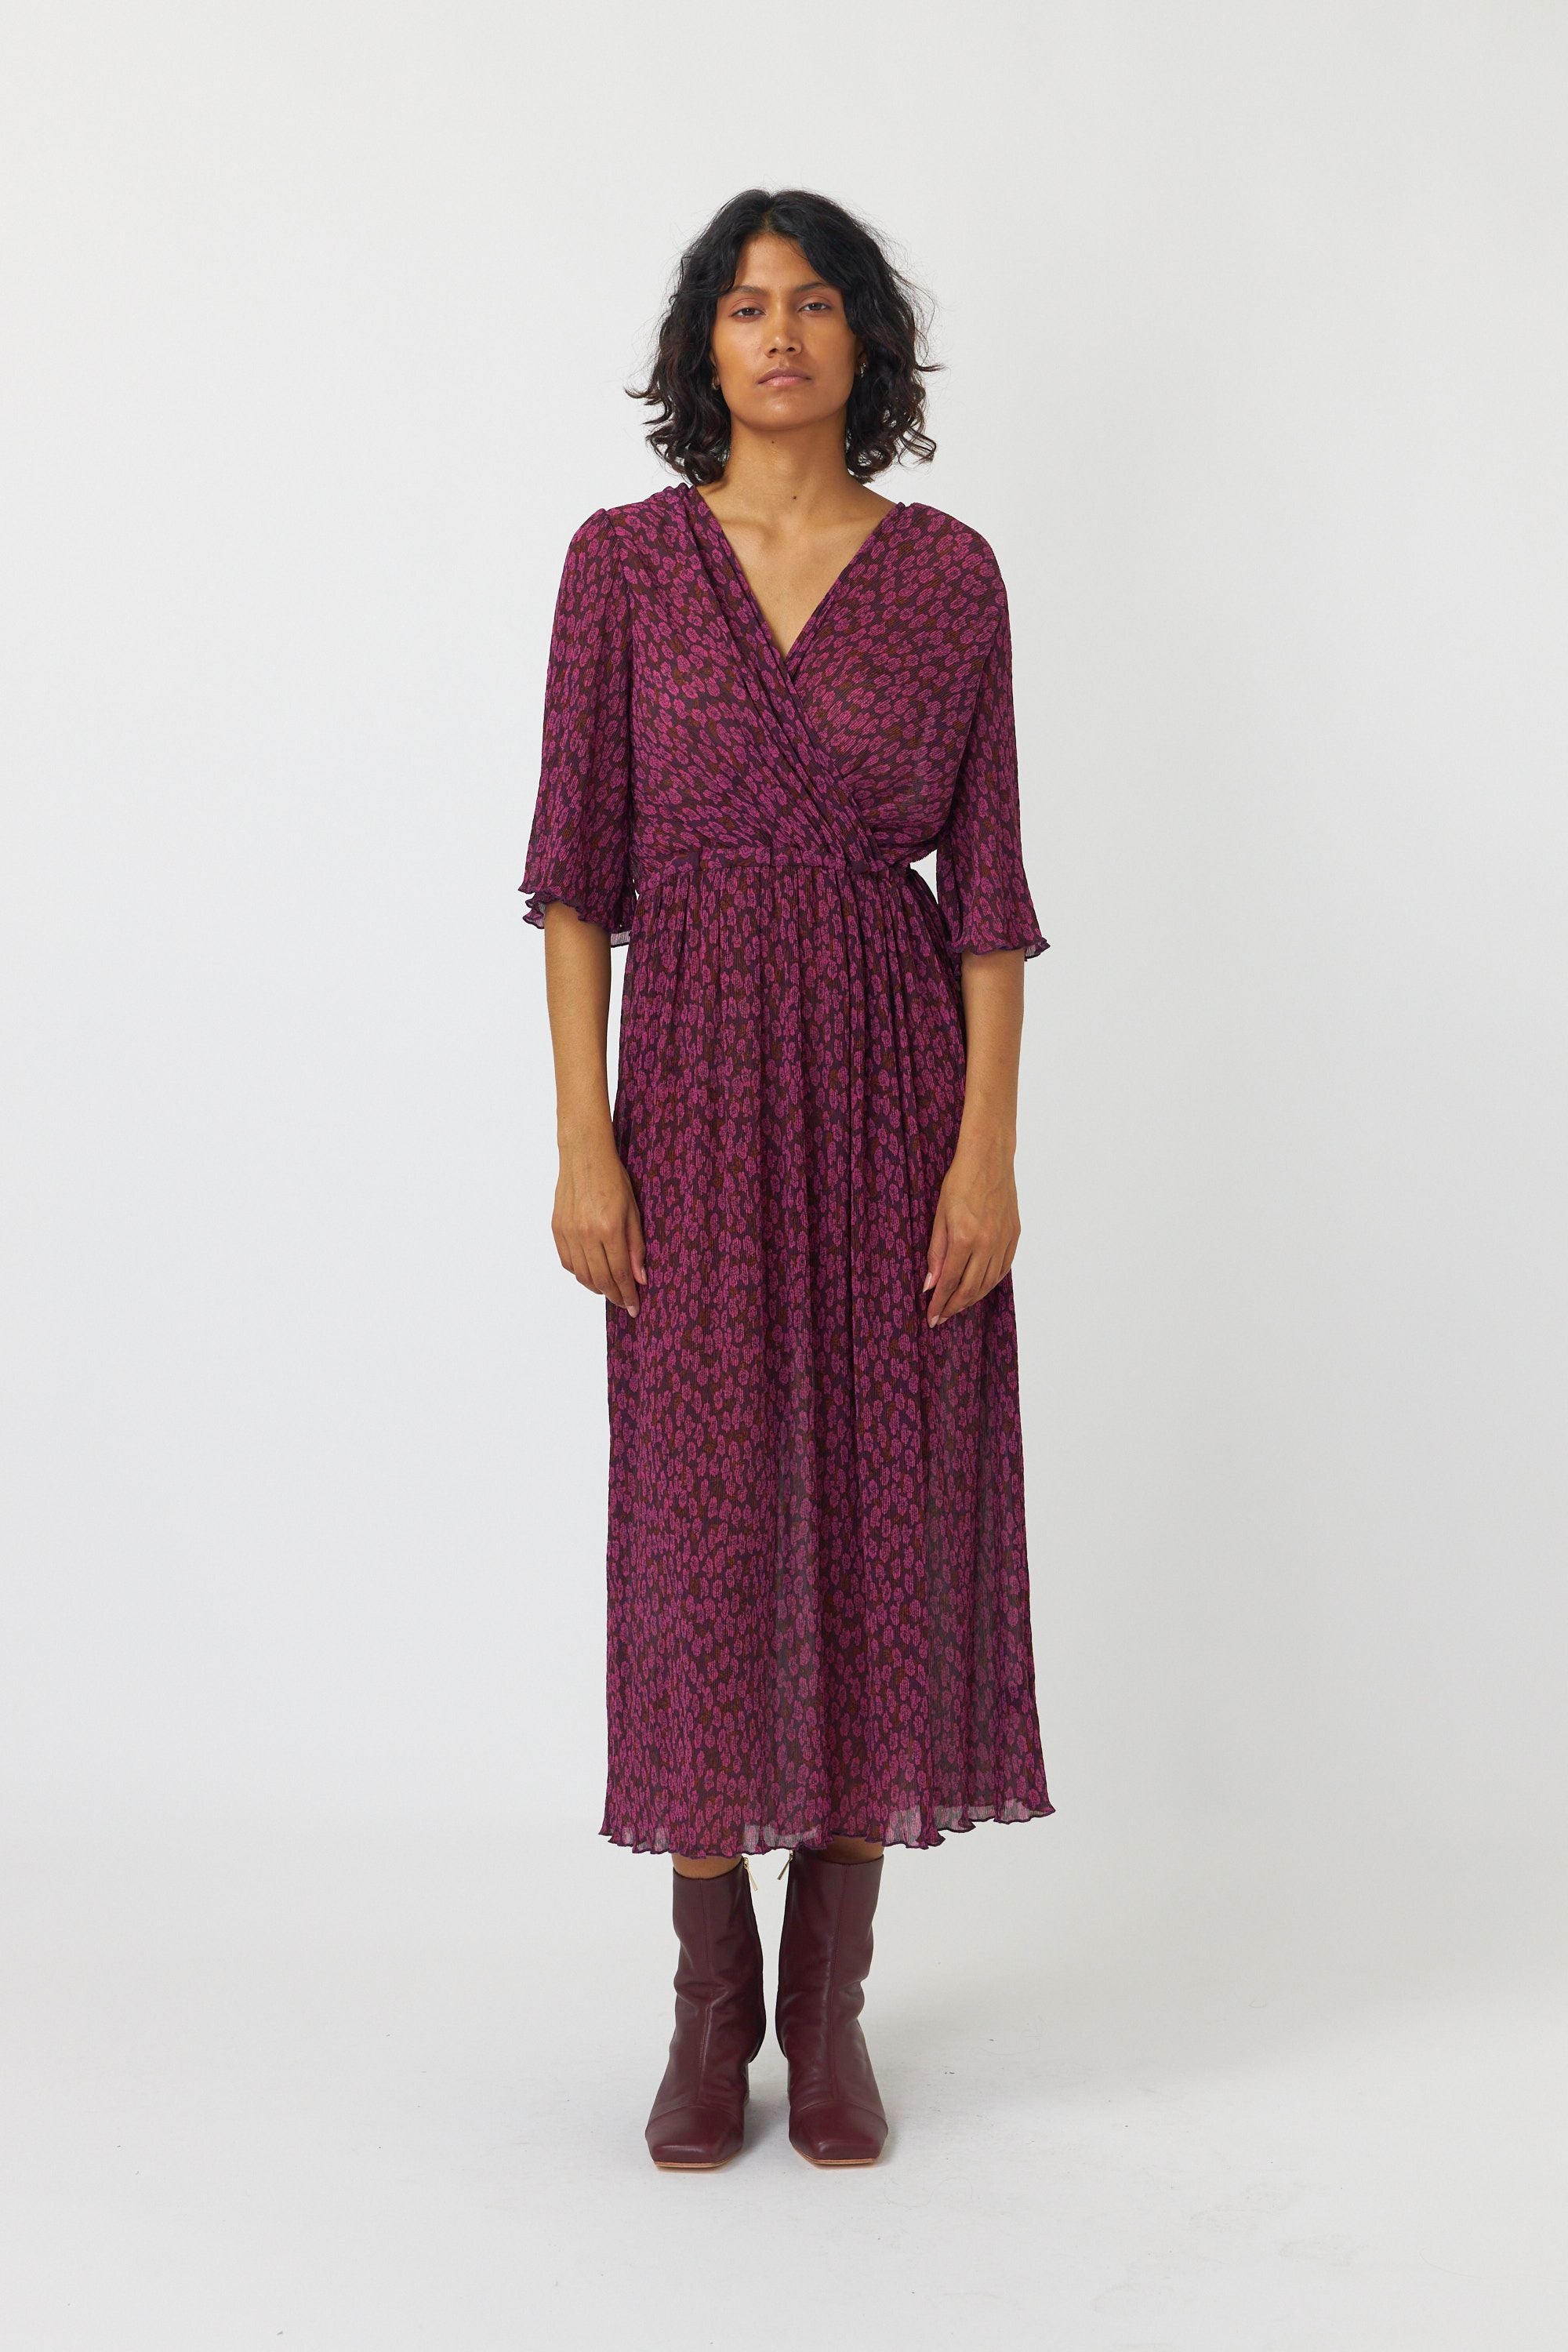 Sylvester Blooming Dress - Berry